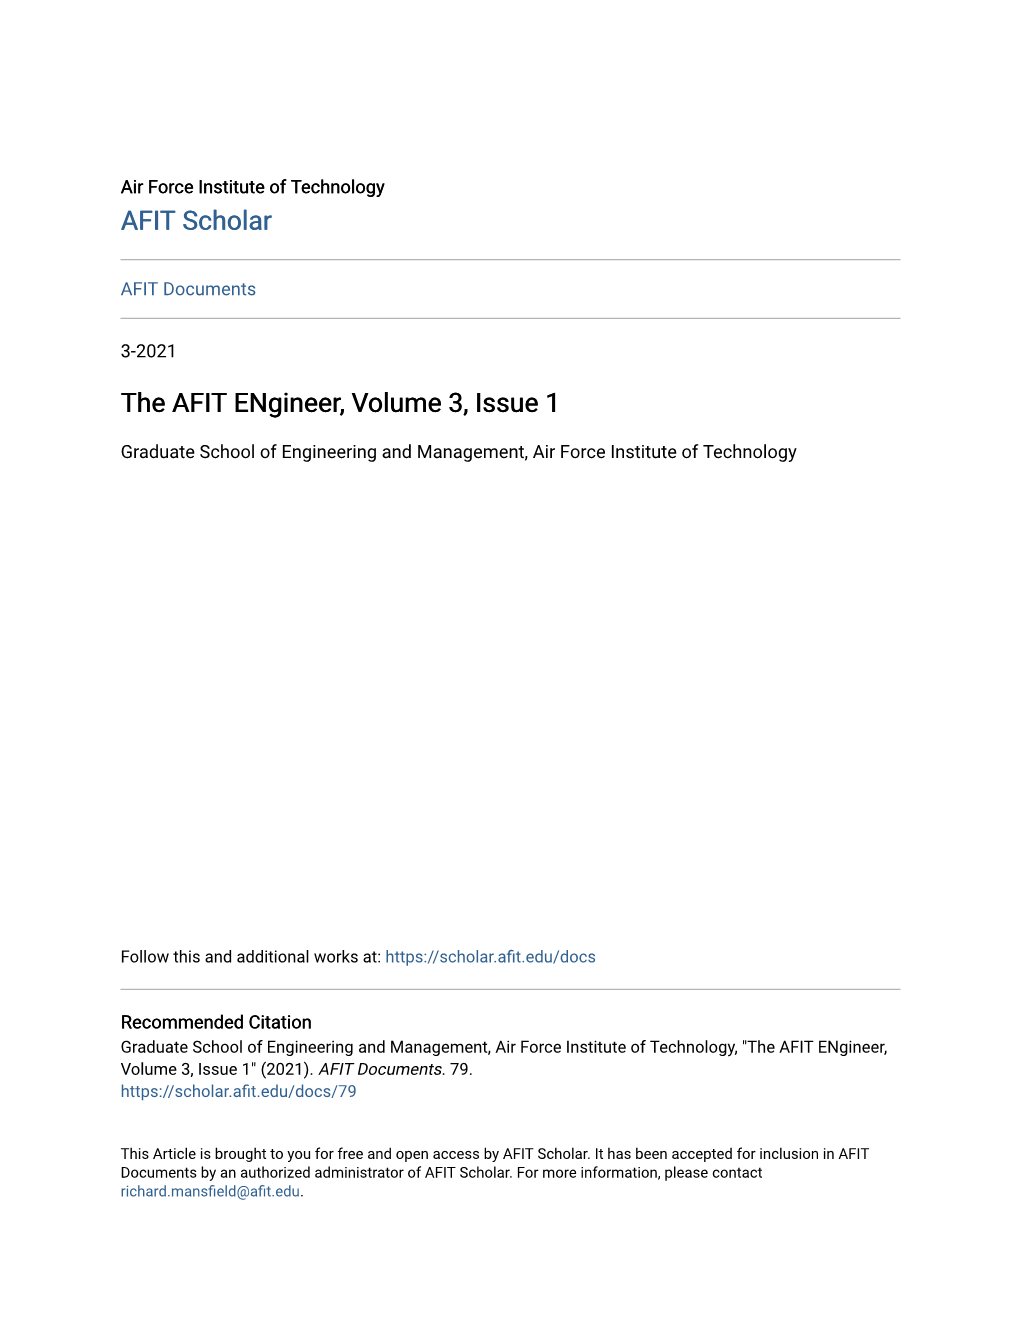 The AFIT Engineer, Volume 3, Issue 1